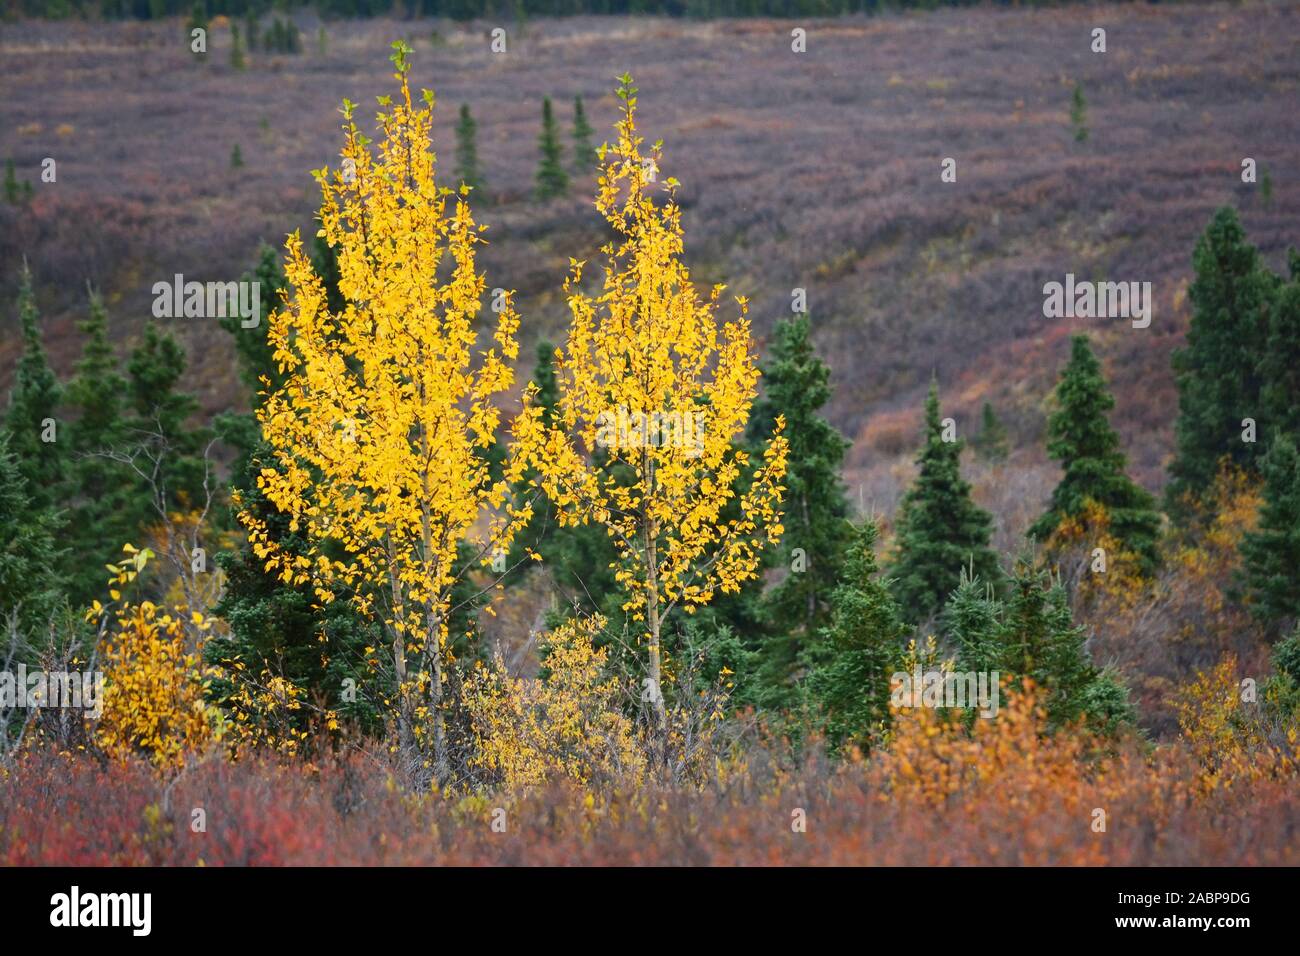 Alaskan forest in fall colors Stock Photo